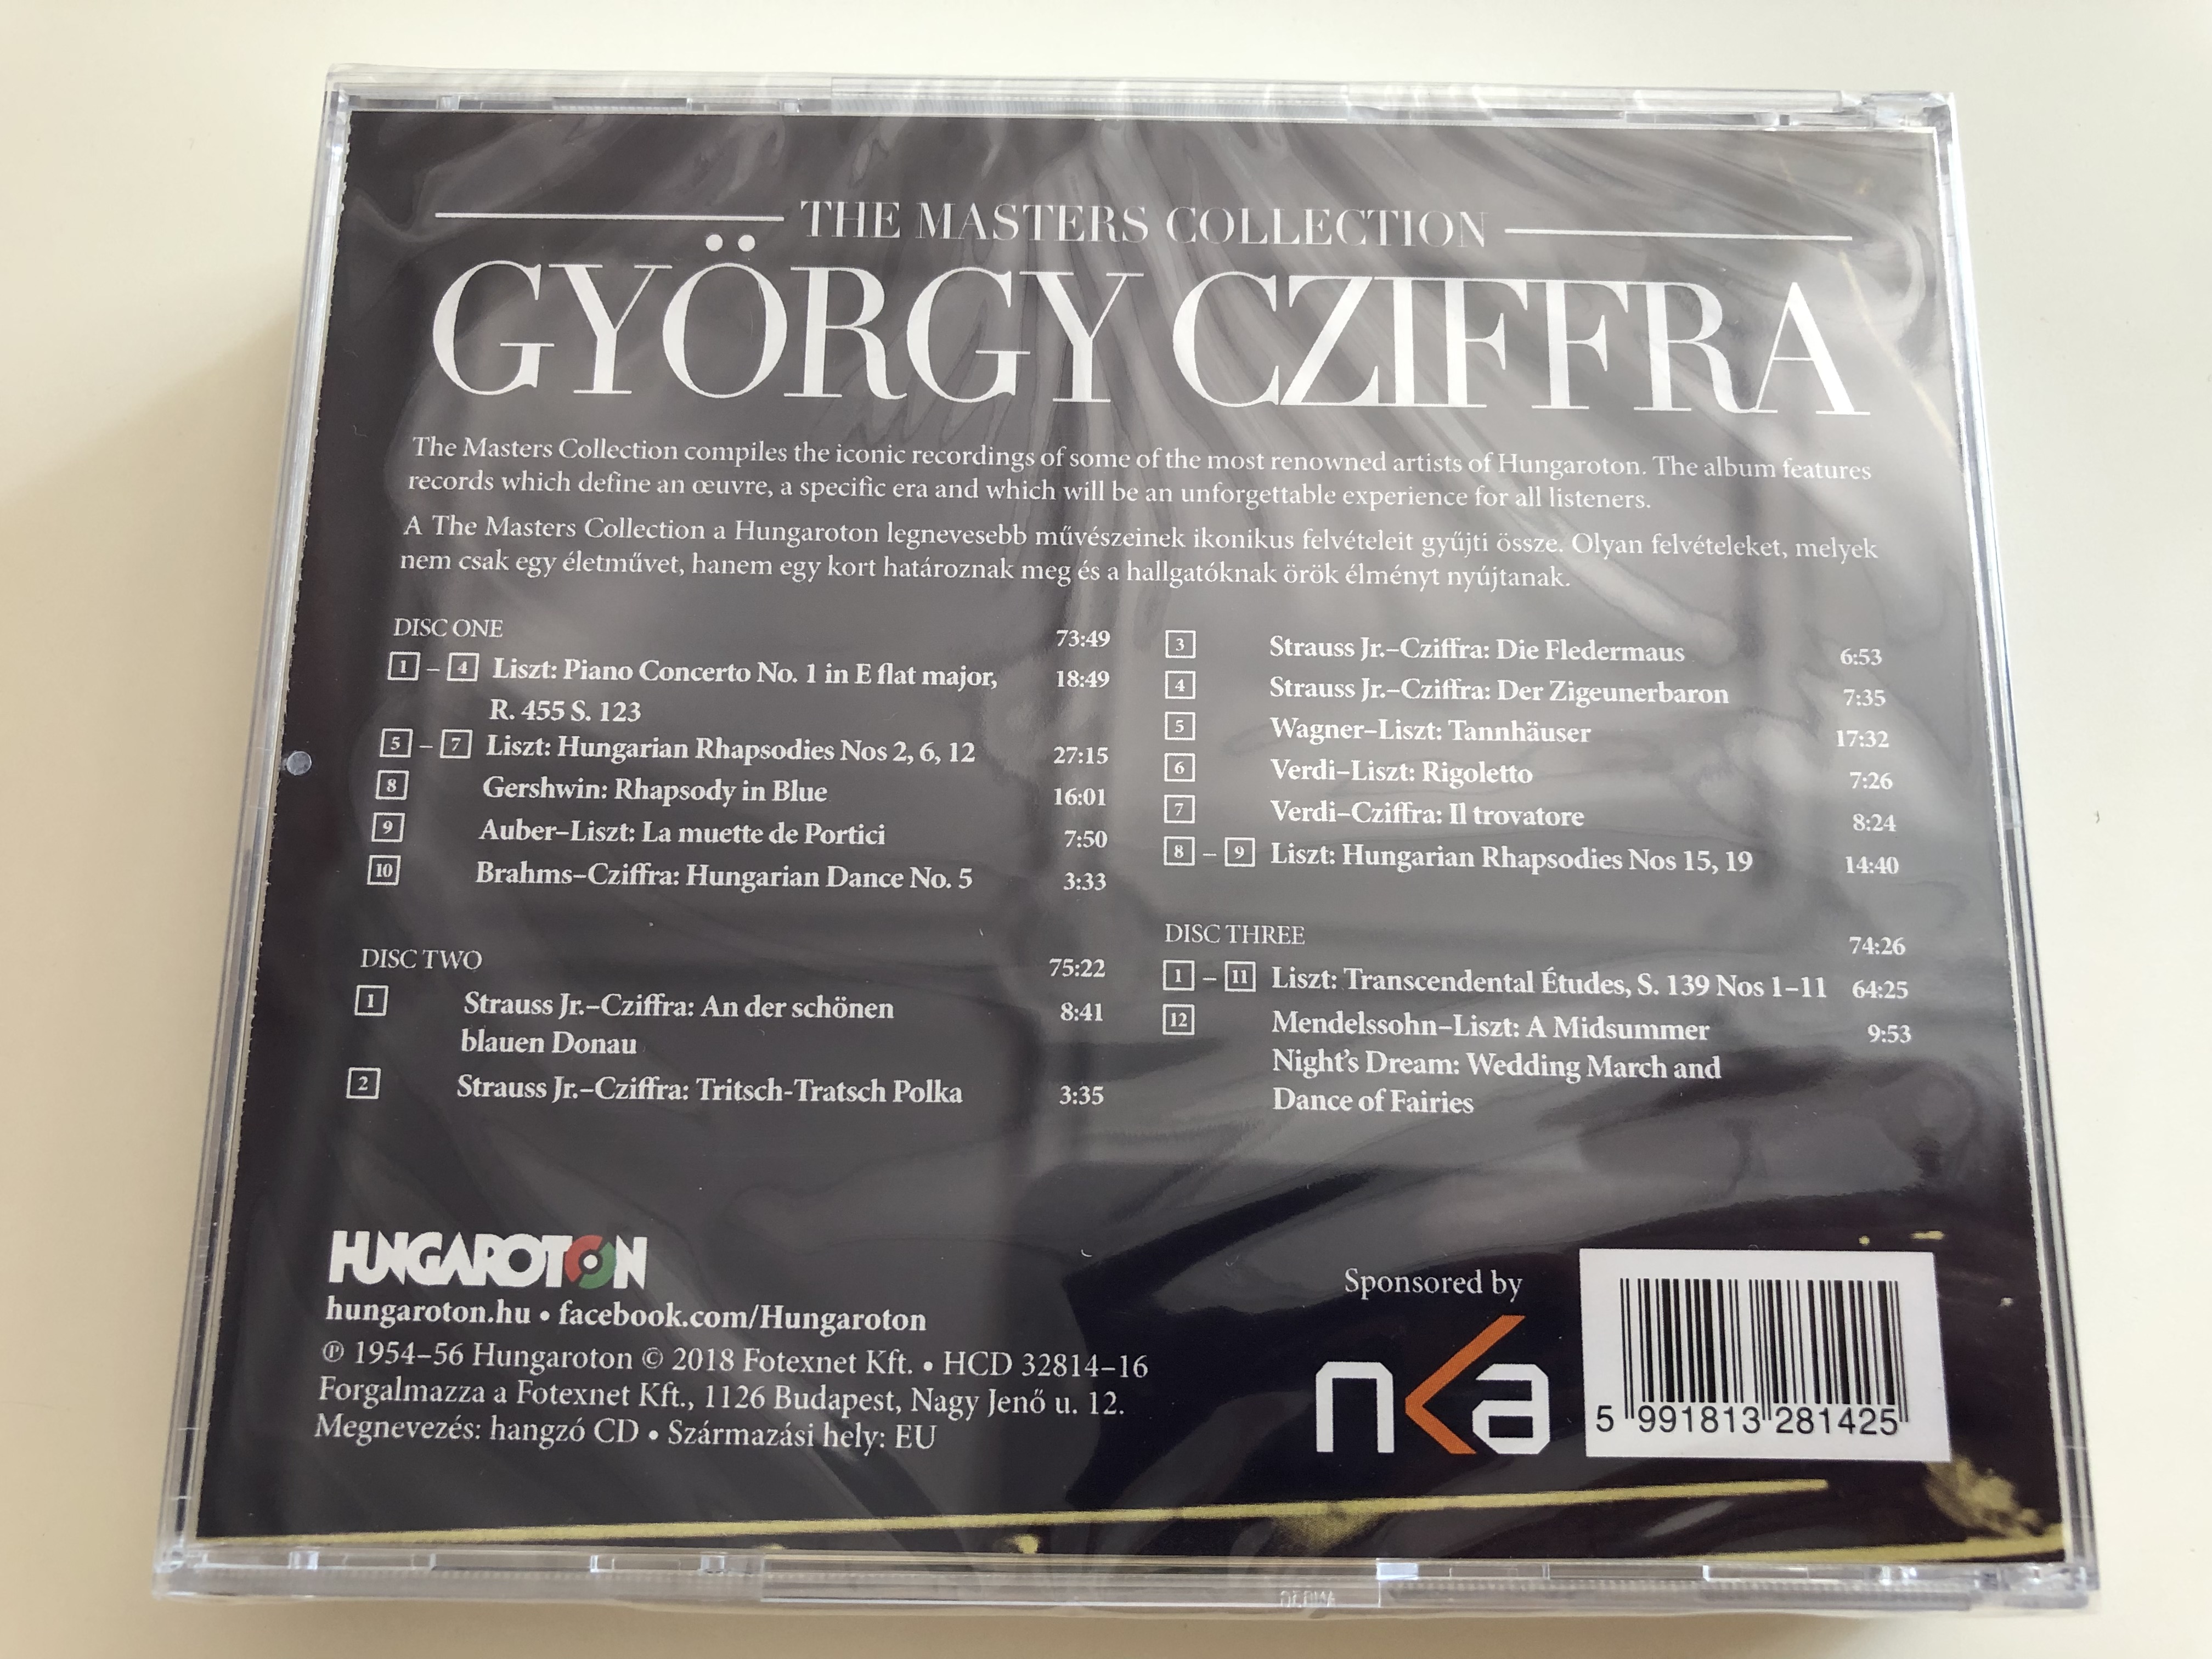 the-masters-collection-gy-rgy-cziffra-audio-cd-2018-iconic-recordings-of-the-most-renowned-artists-of-hungaroton-hcd-32814-16-3-cd-set-3-.jpg